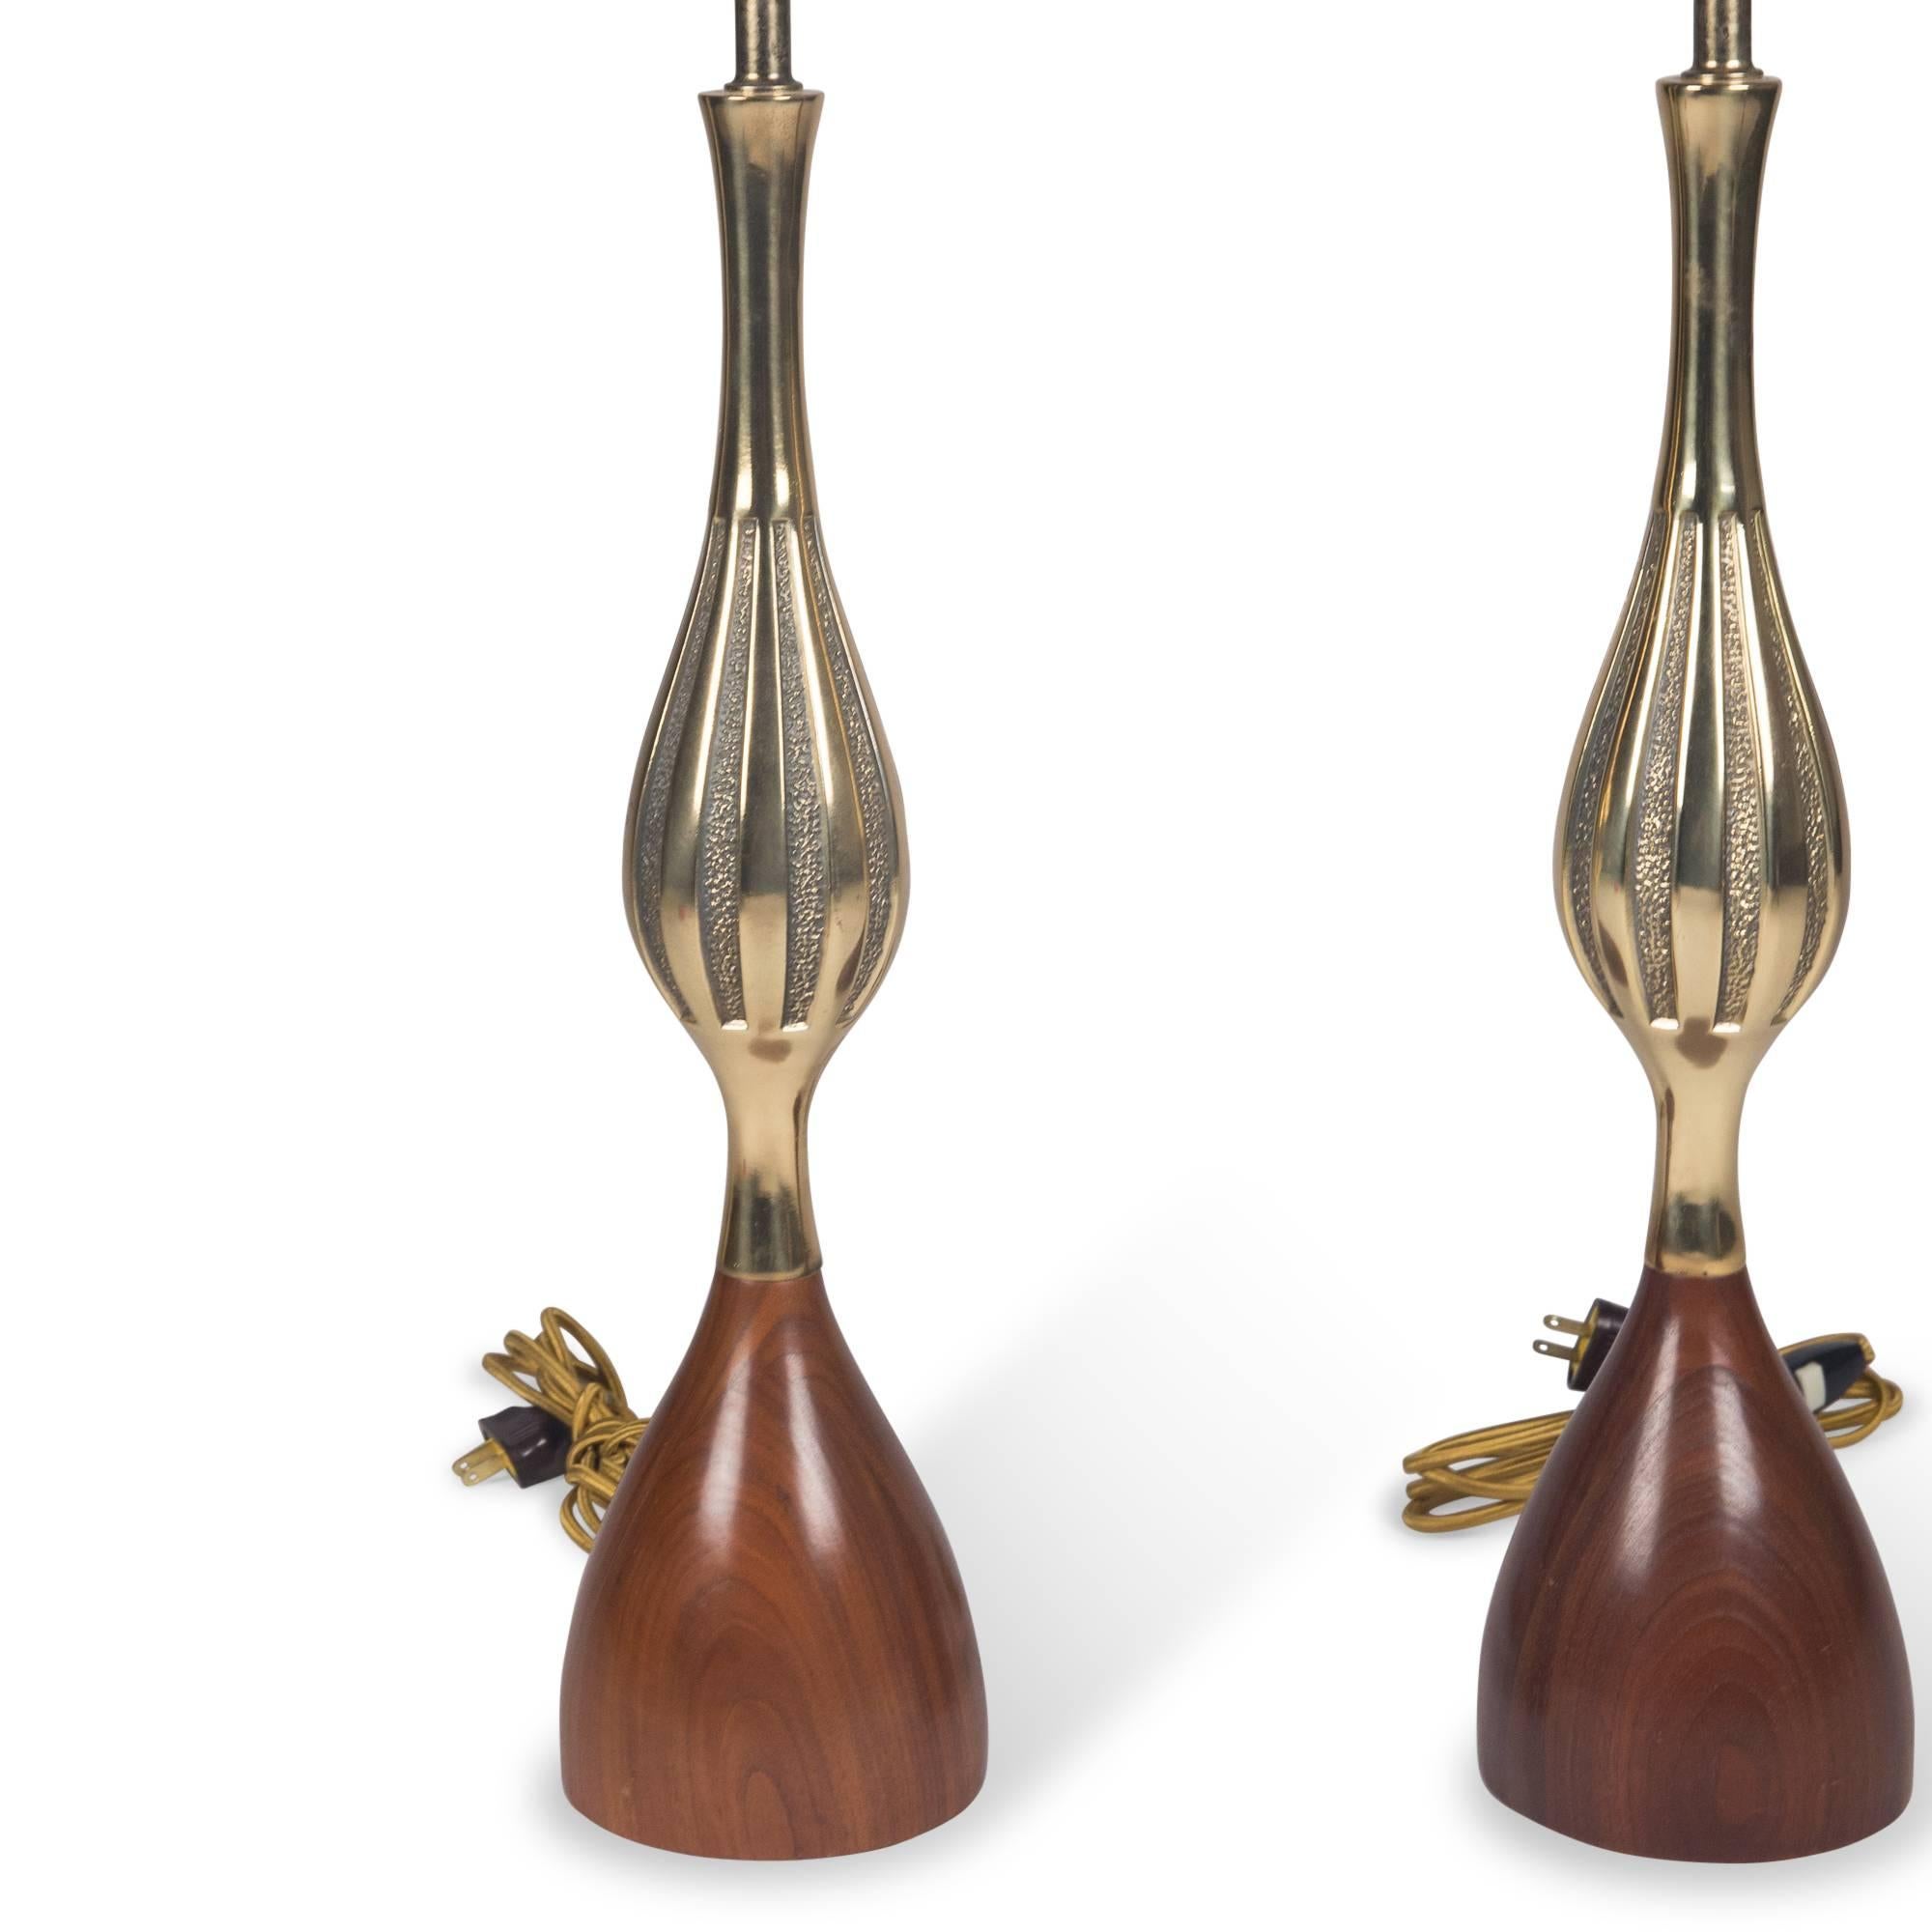 Fluted bronze tapered form table lamps, on cone-shaped walnut base, United States, early 1960s. Measures: Height to top of socket 24 in, diameter at base 5 in. Height of wood portion 6 1/2 in.